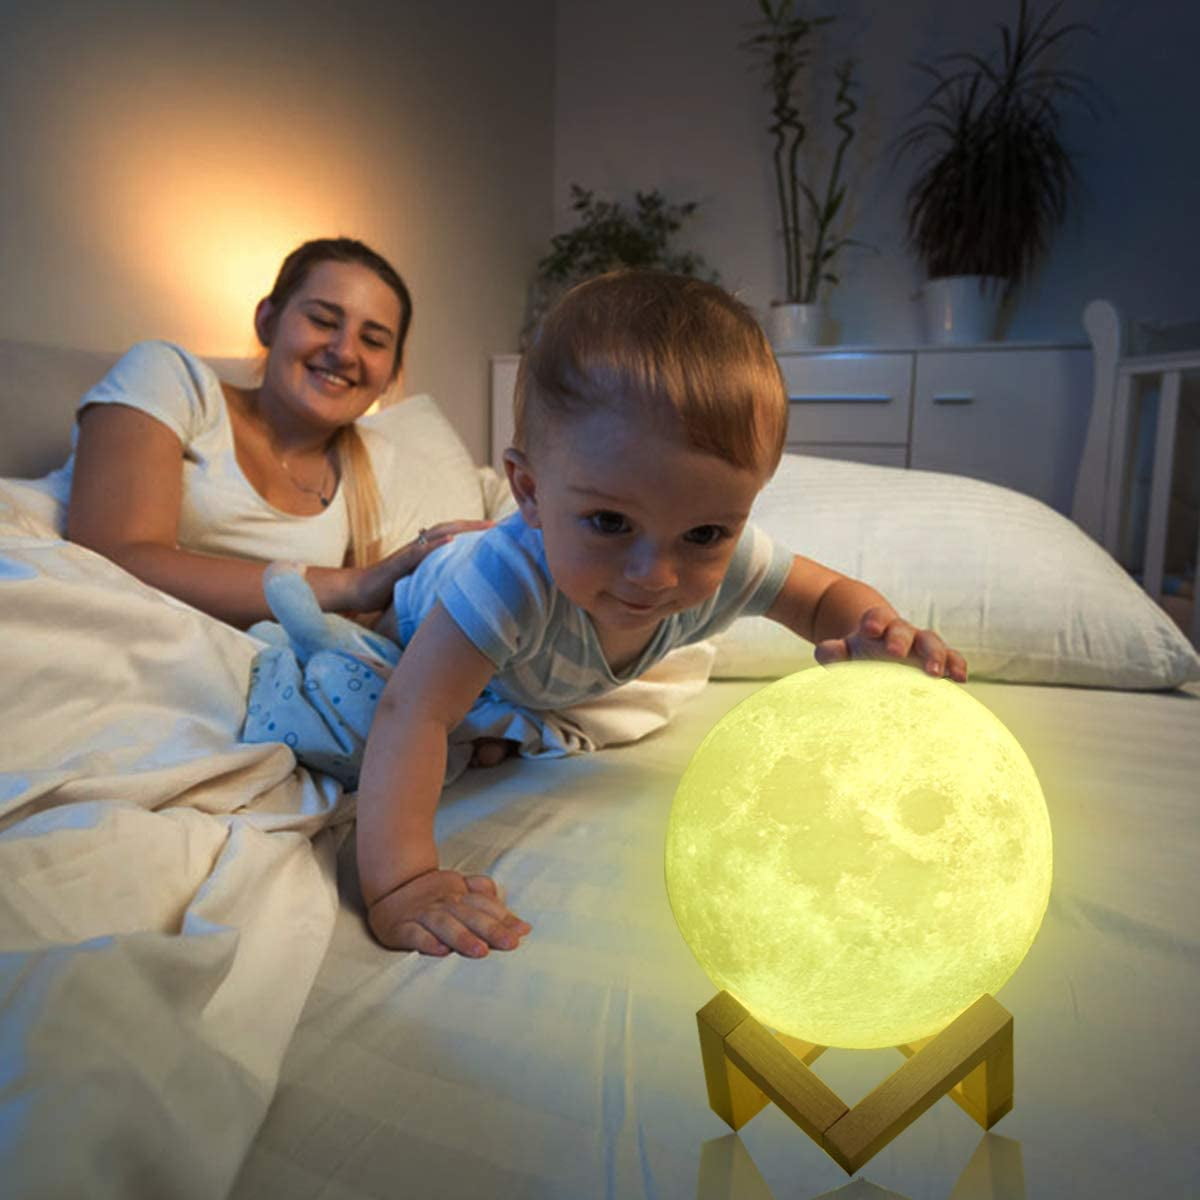 Lunar Night Lamp Decor Birthday Gifts for Lover Kids Friend Party Bedroom Moon Lamp 3D Printed Dimmable Timer Moonlight 4.7 Inch 16 Colors with Stand & Remote & Touch Control & USB Rechargeable